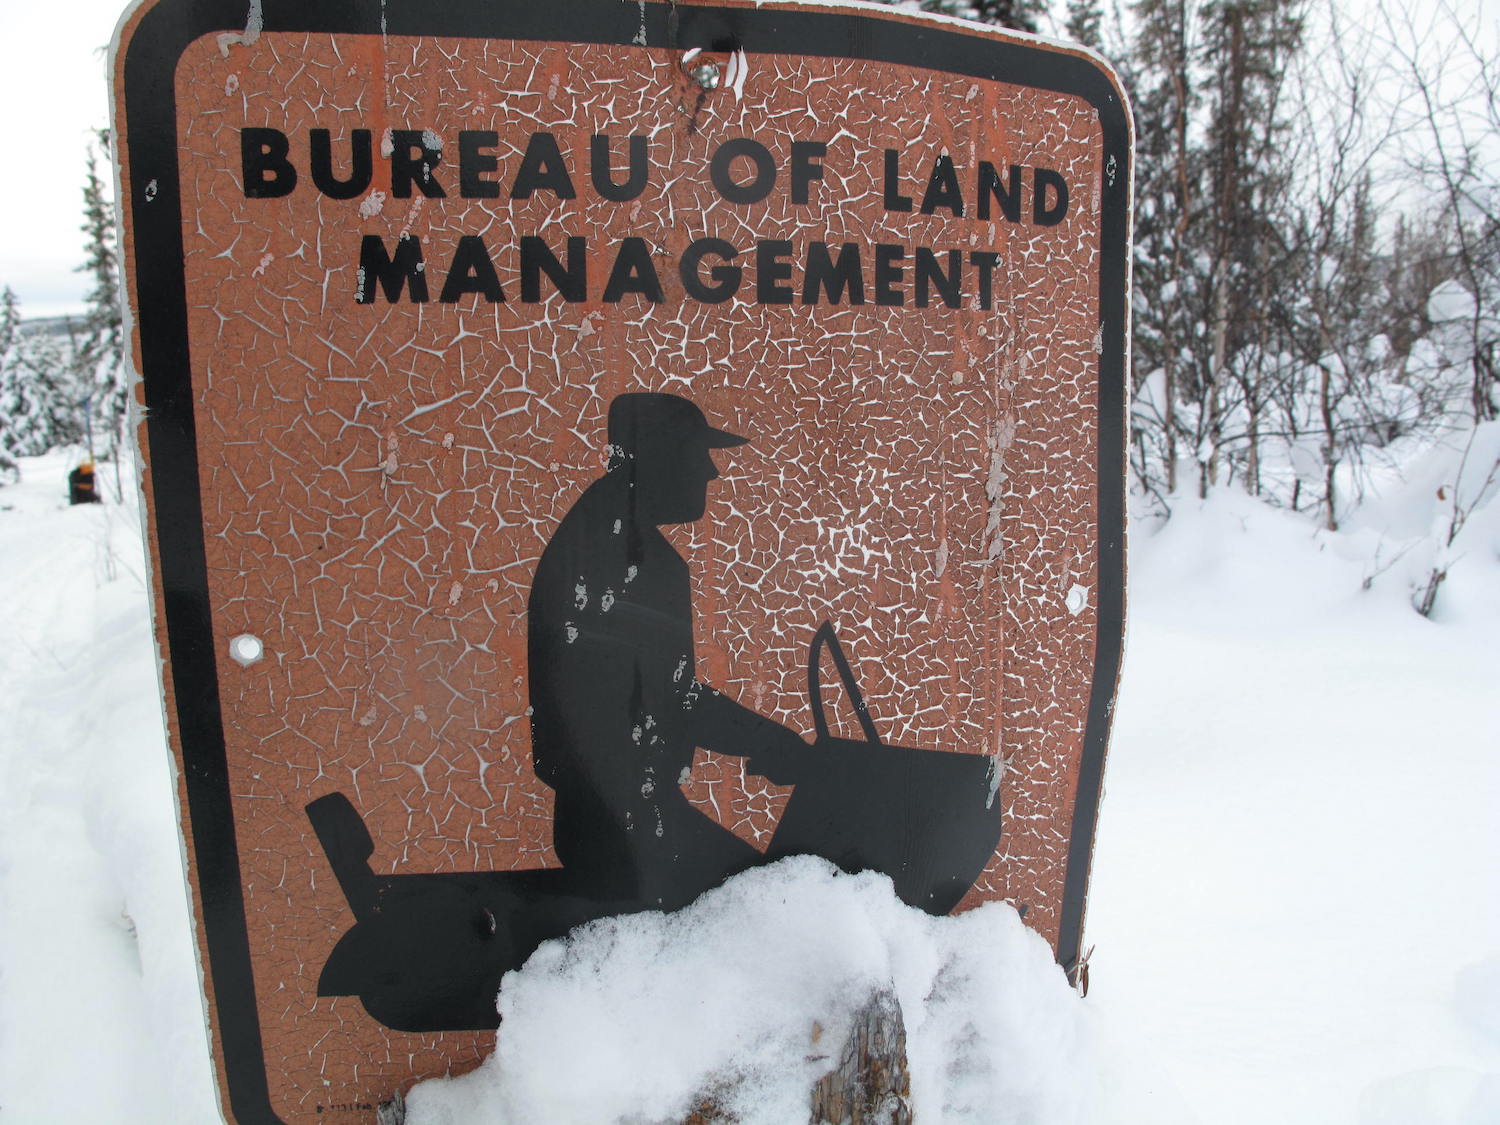 A brown winter trail sign features a black silhouette image of a person riding an old-style snowmachine.